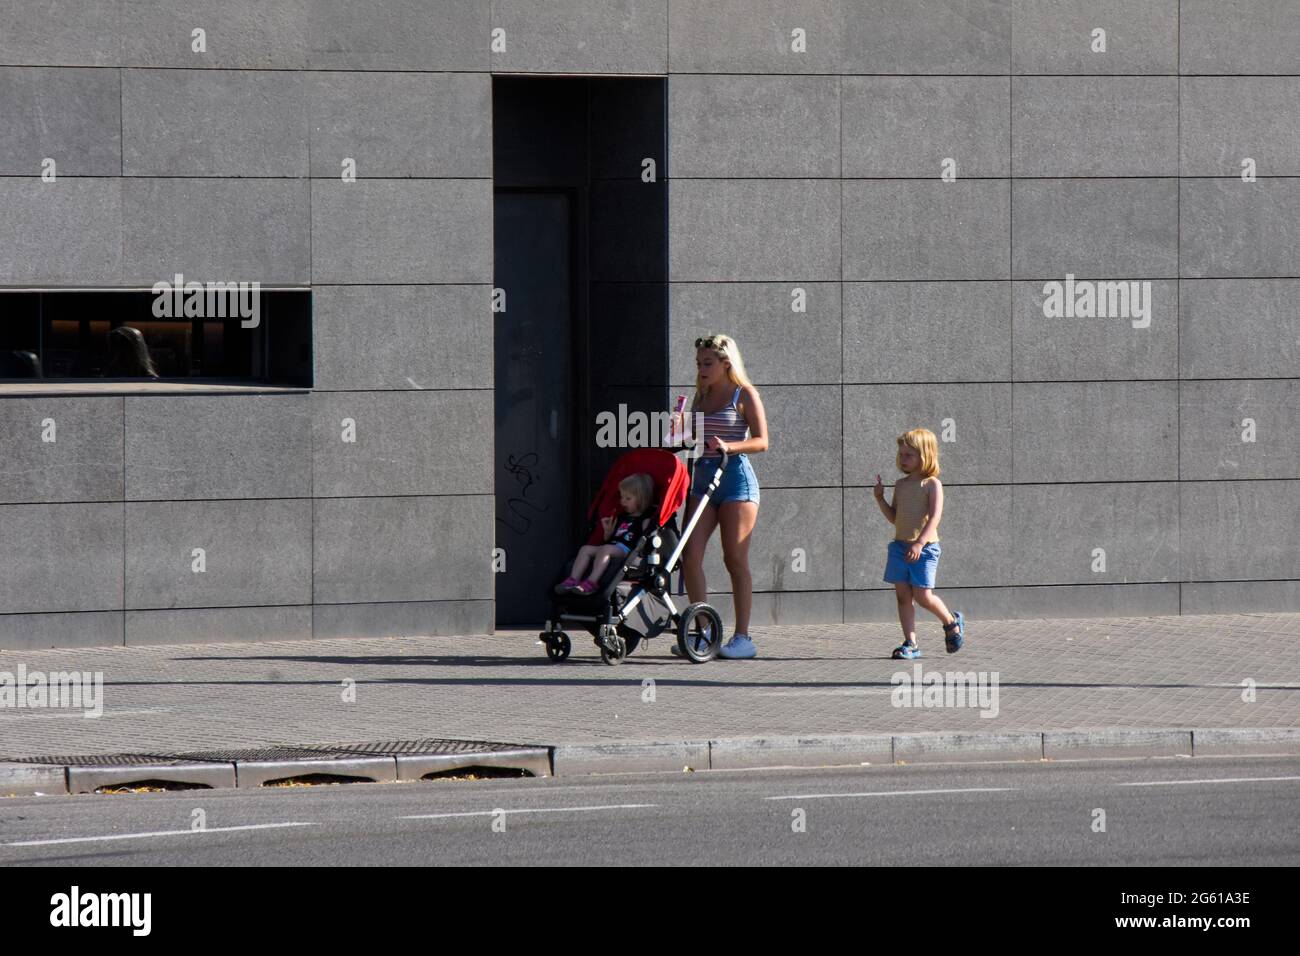 Family eating ice cream down the street. Mother with her two little ones. Blond woman with ice cream pushing the stroller with her daughter inside. Stock Photo